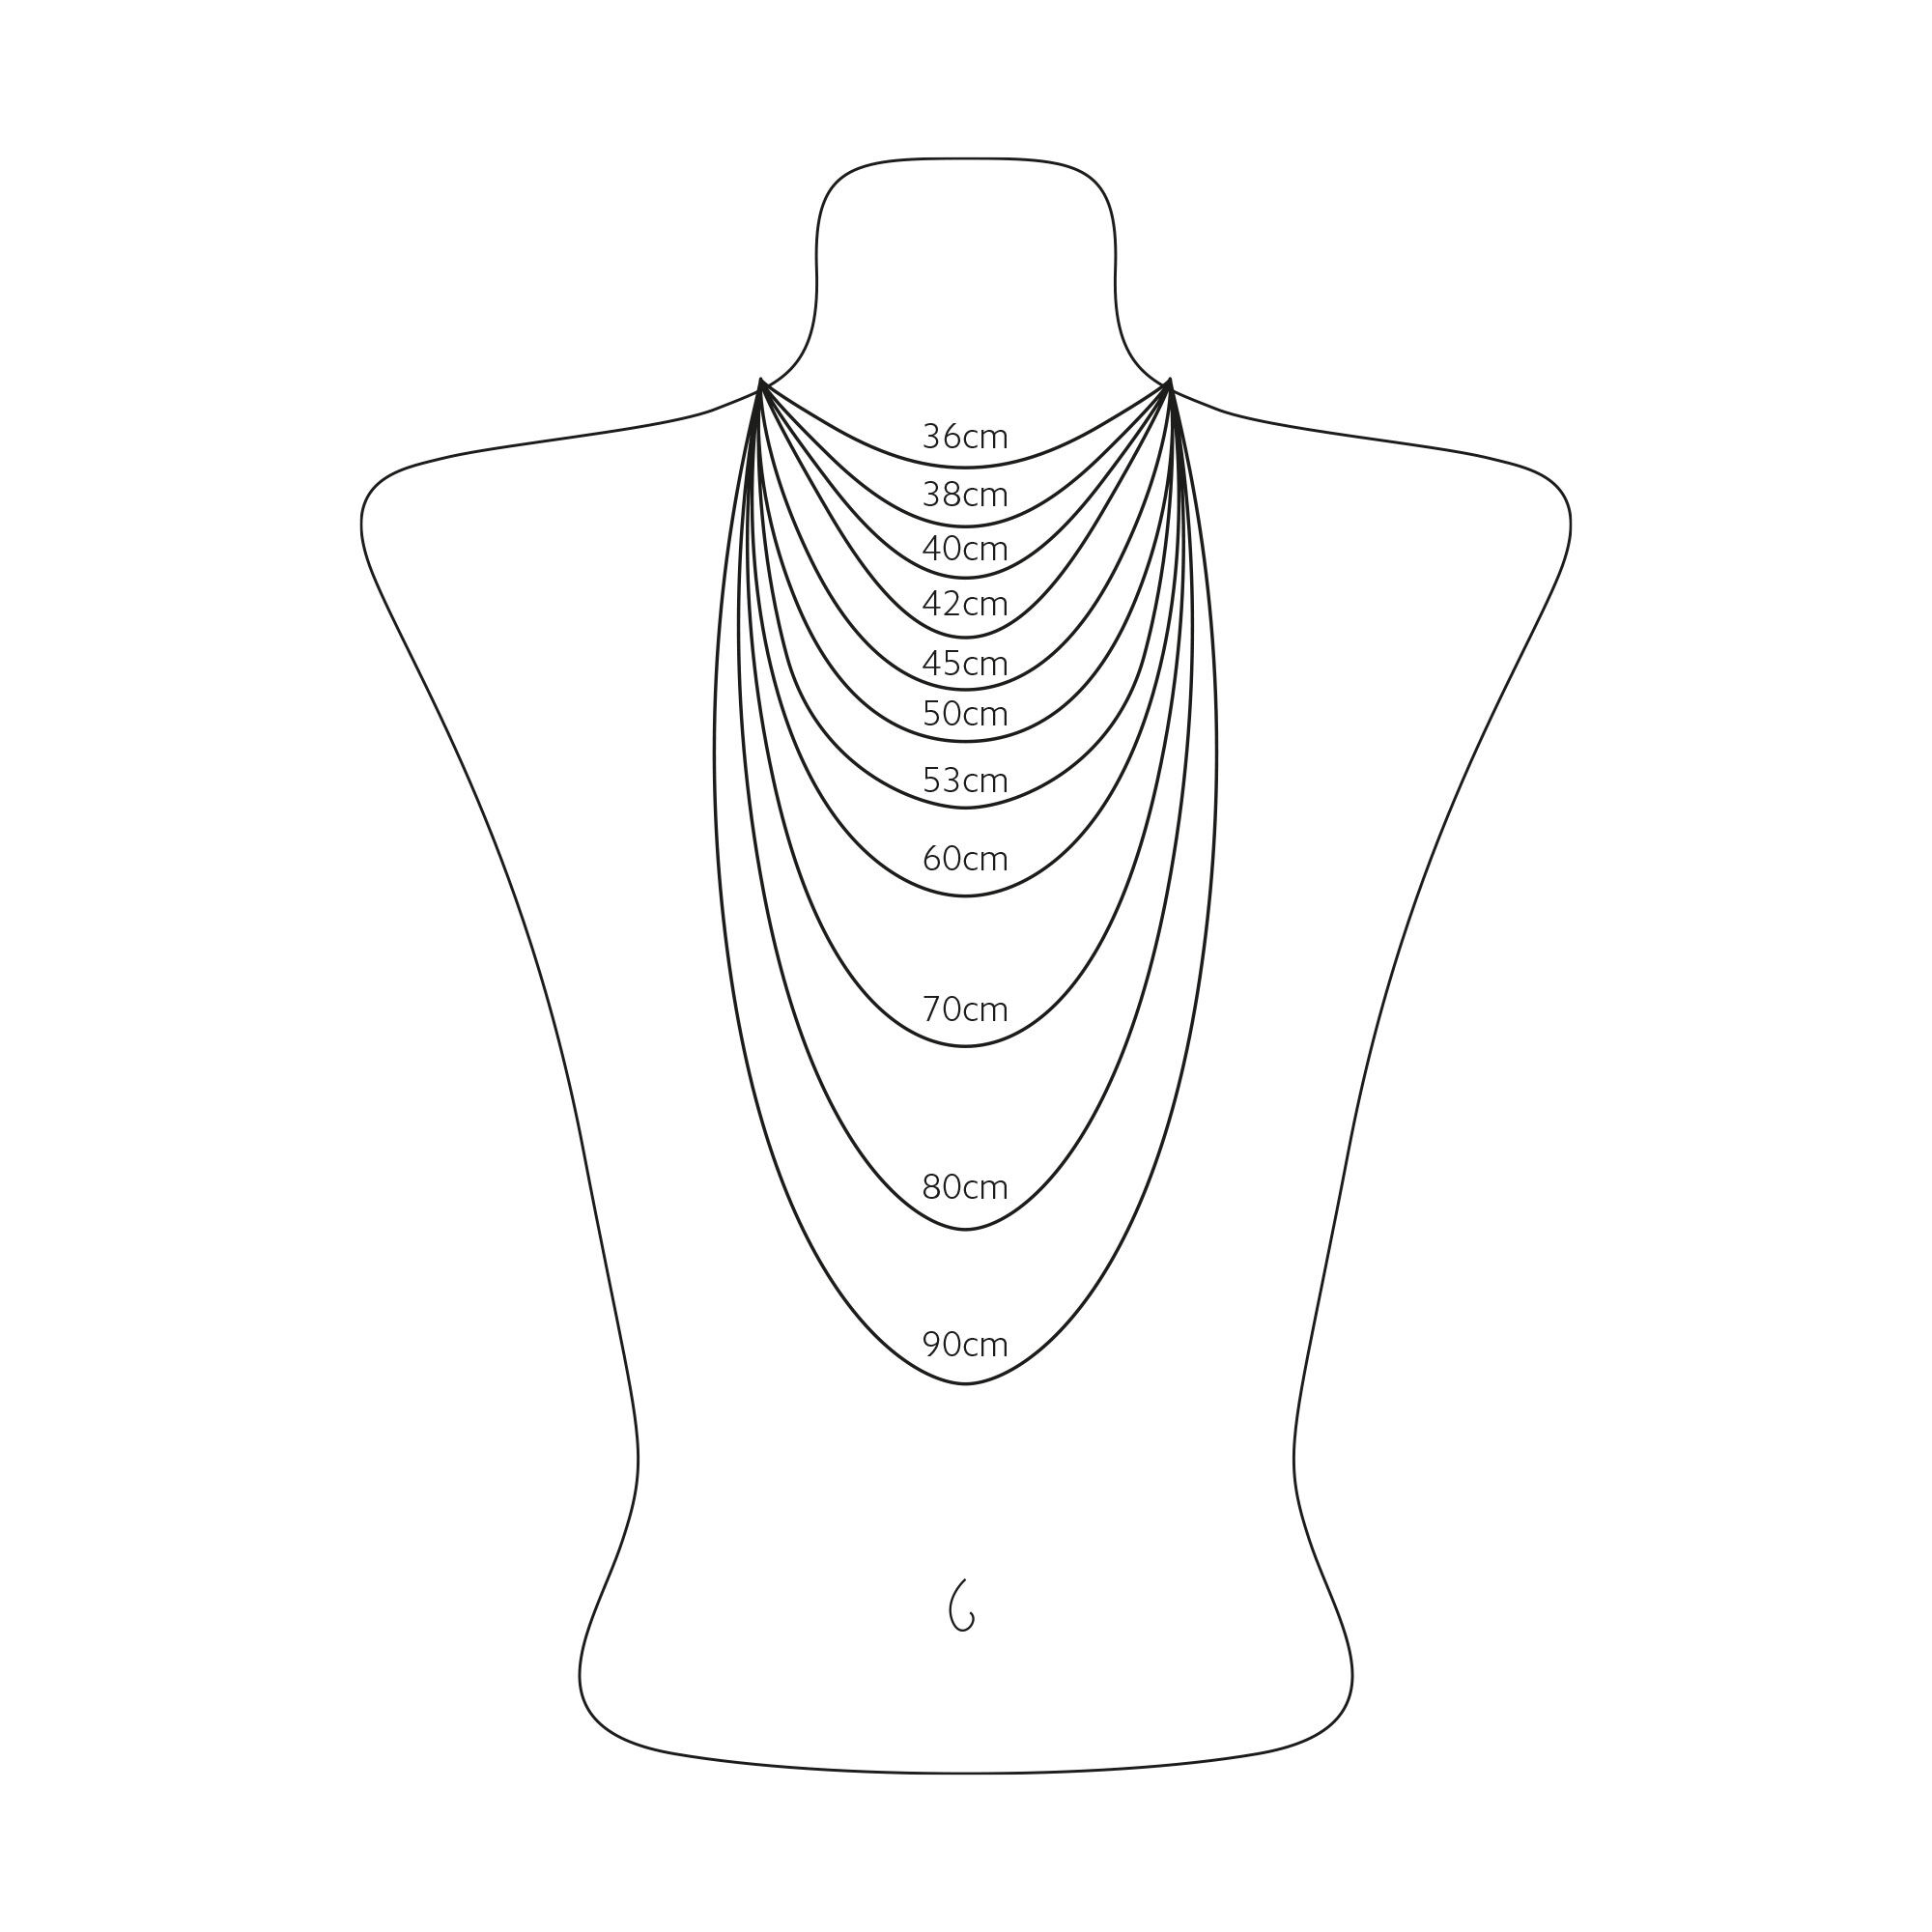 Chain Necklace Length Chart